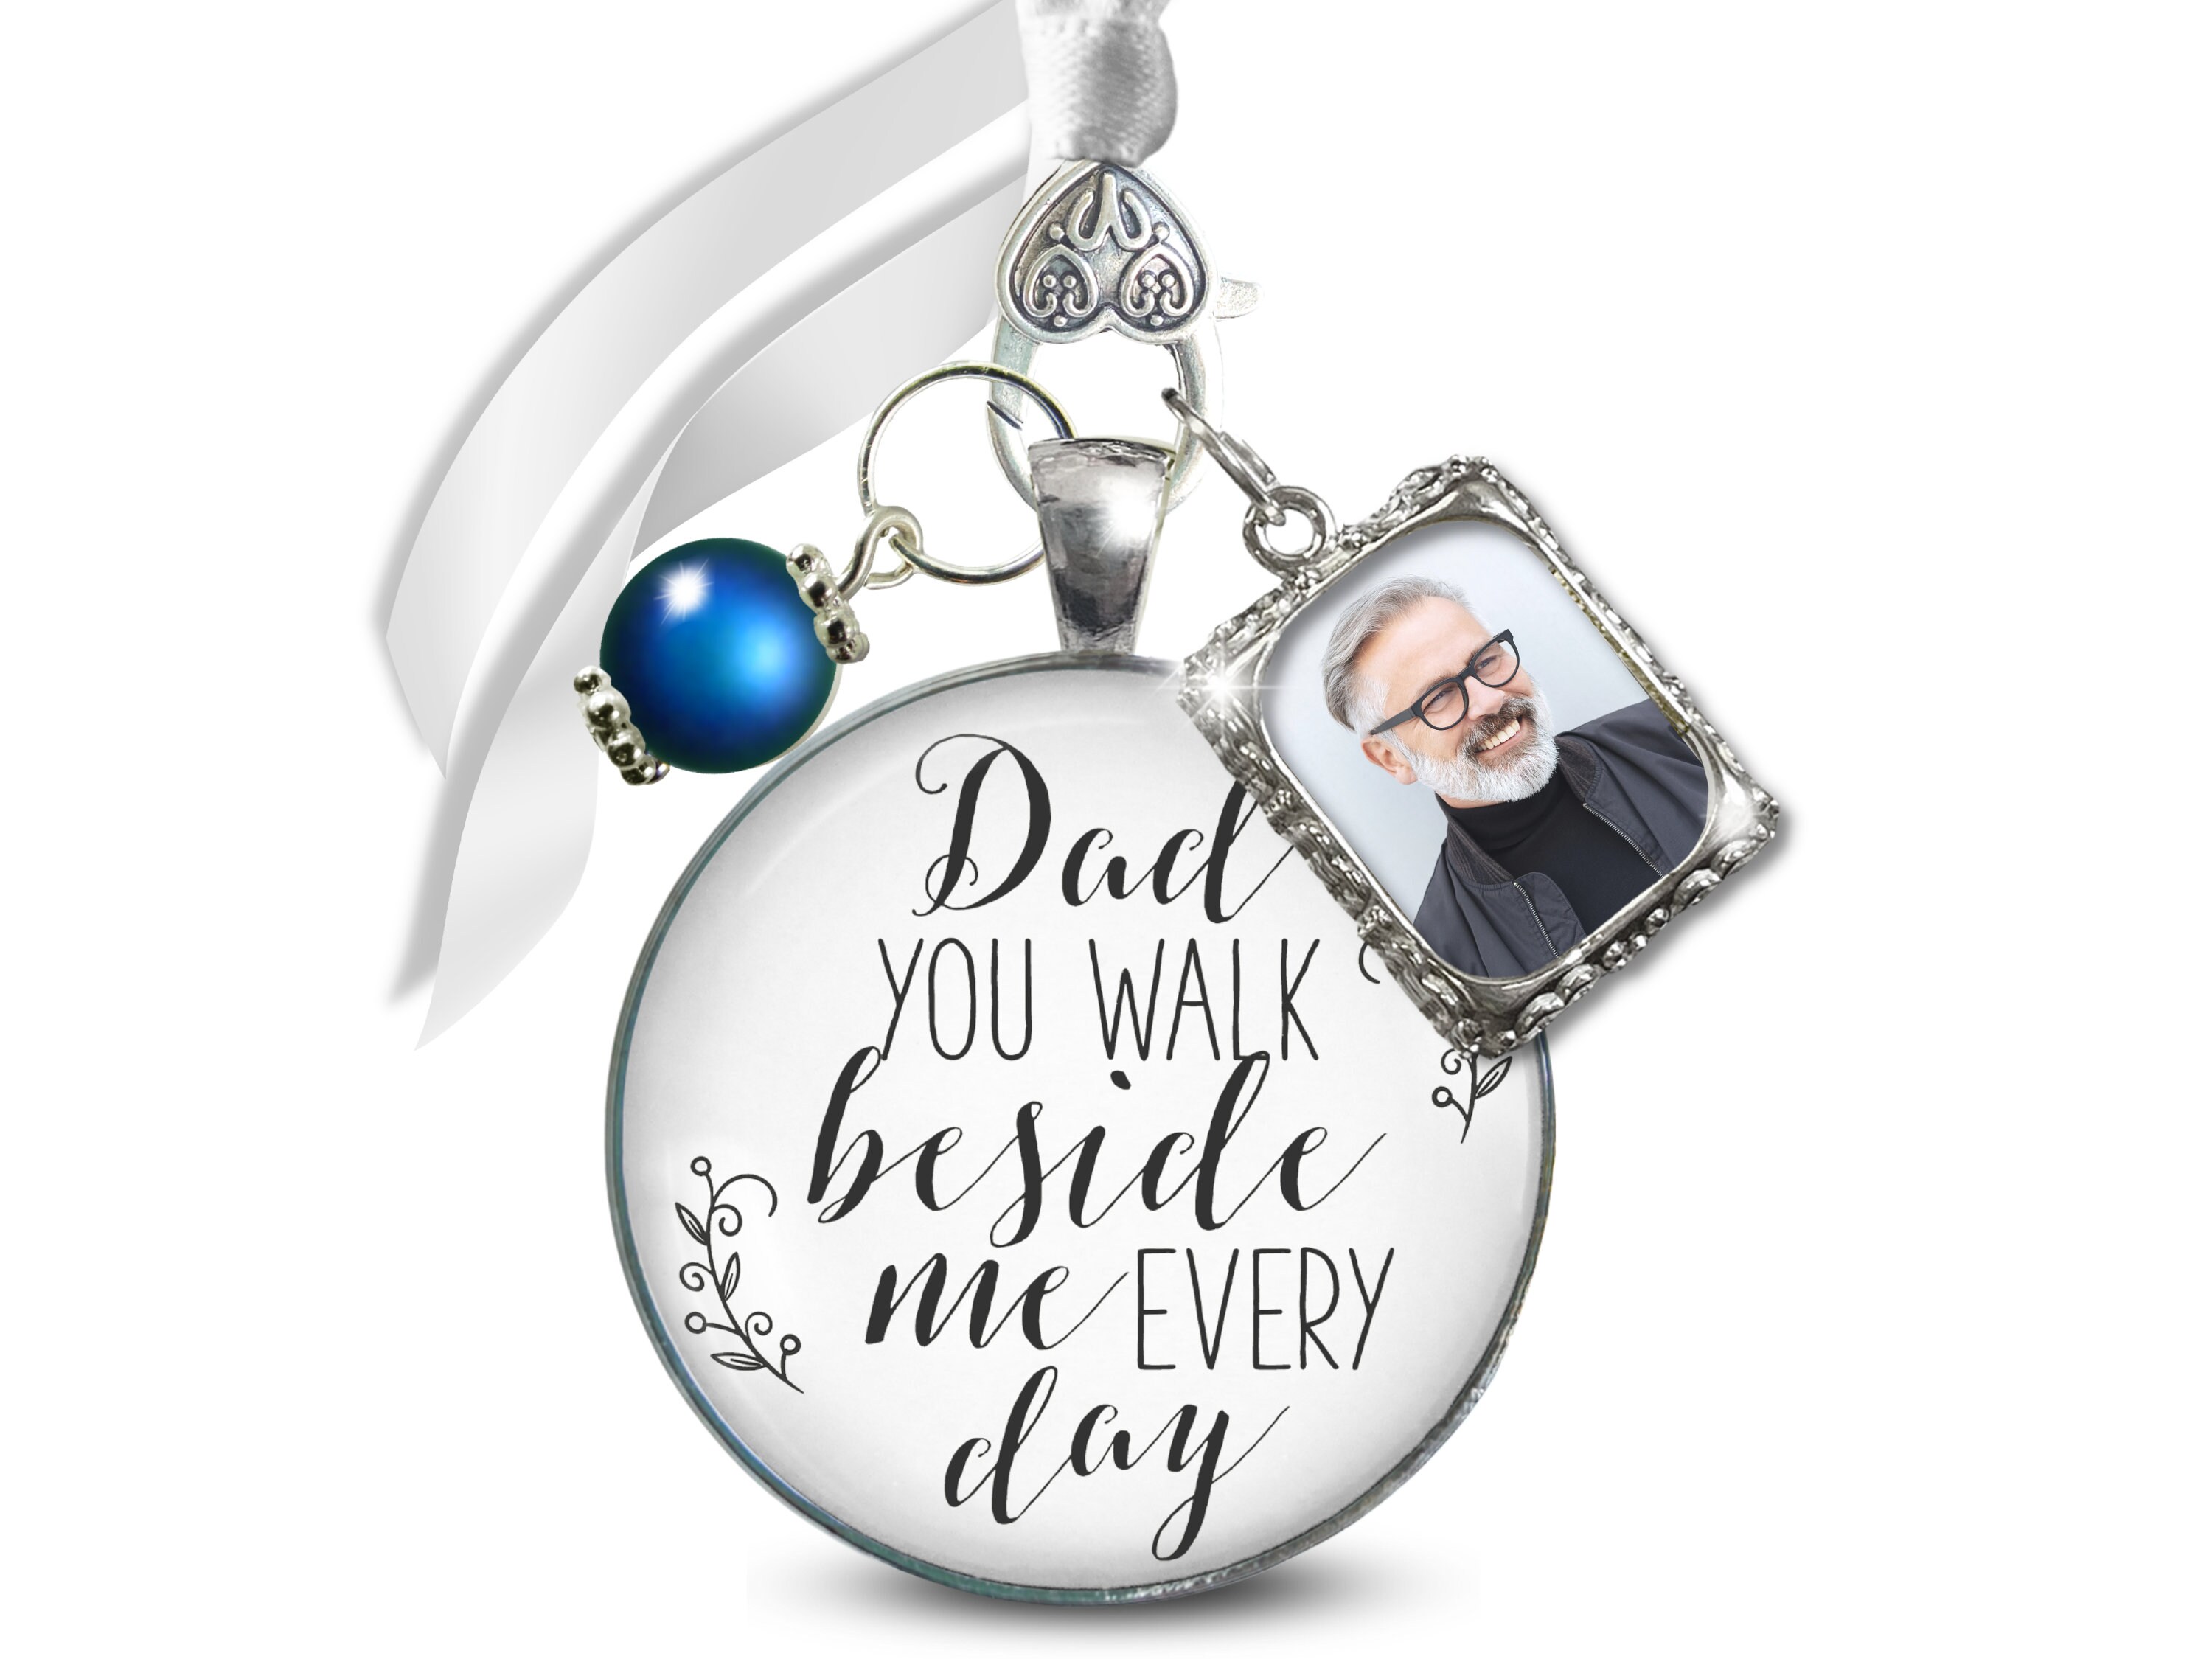  Wedding Memory Bouquet Charm Missing Grandma and Grandpa 2  Frames Bridal Memorial White Silver Finish DIY Picture Template : Handmade  Products